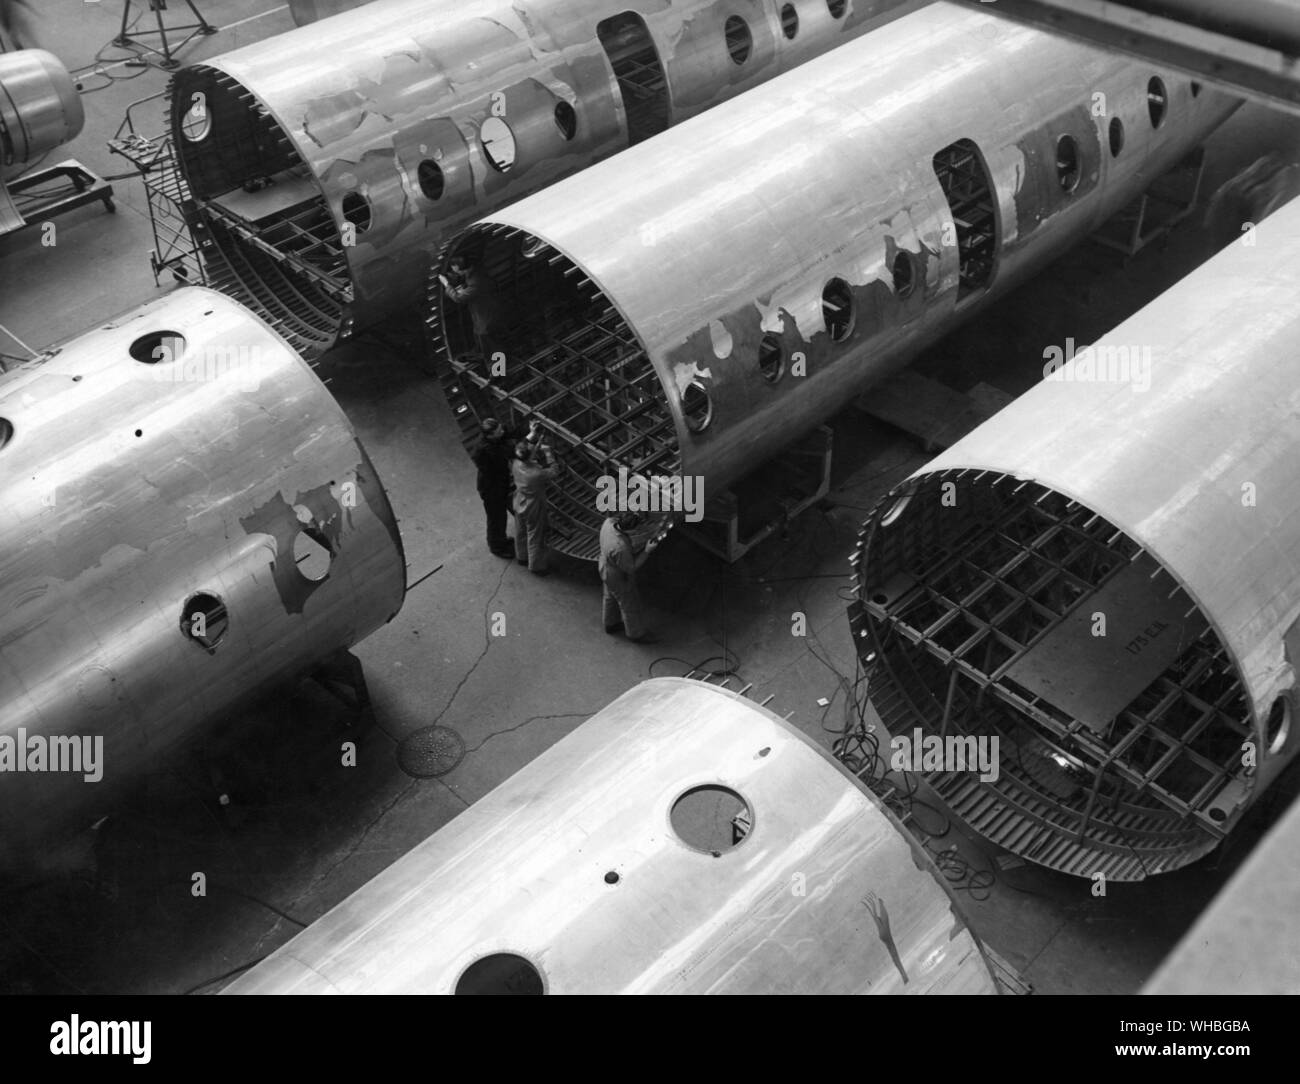 Aircraft Production : Huge hanger at Filton Bristol , displaying fuselages ready for the production of the Bristol Britannia Mark 100 prop jet airliners , to carry 92 passengers and used on Commonwealth air routes . After the fuselage section has been removed form the jig , work proceeds on the floor structures , installations and services . Stock Photo